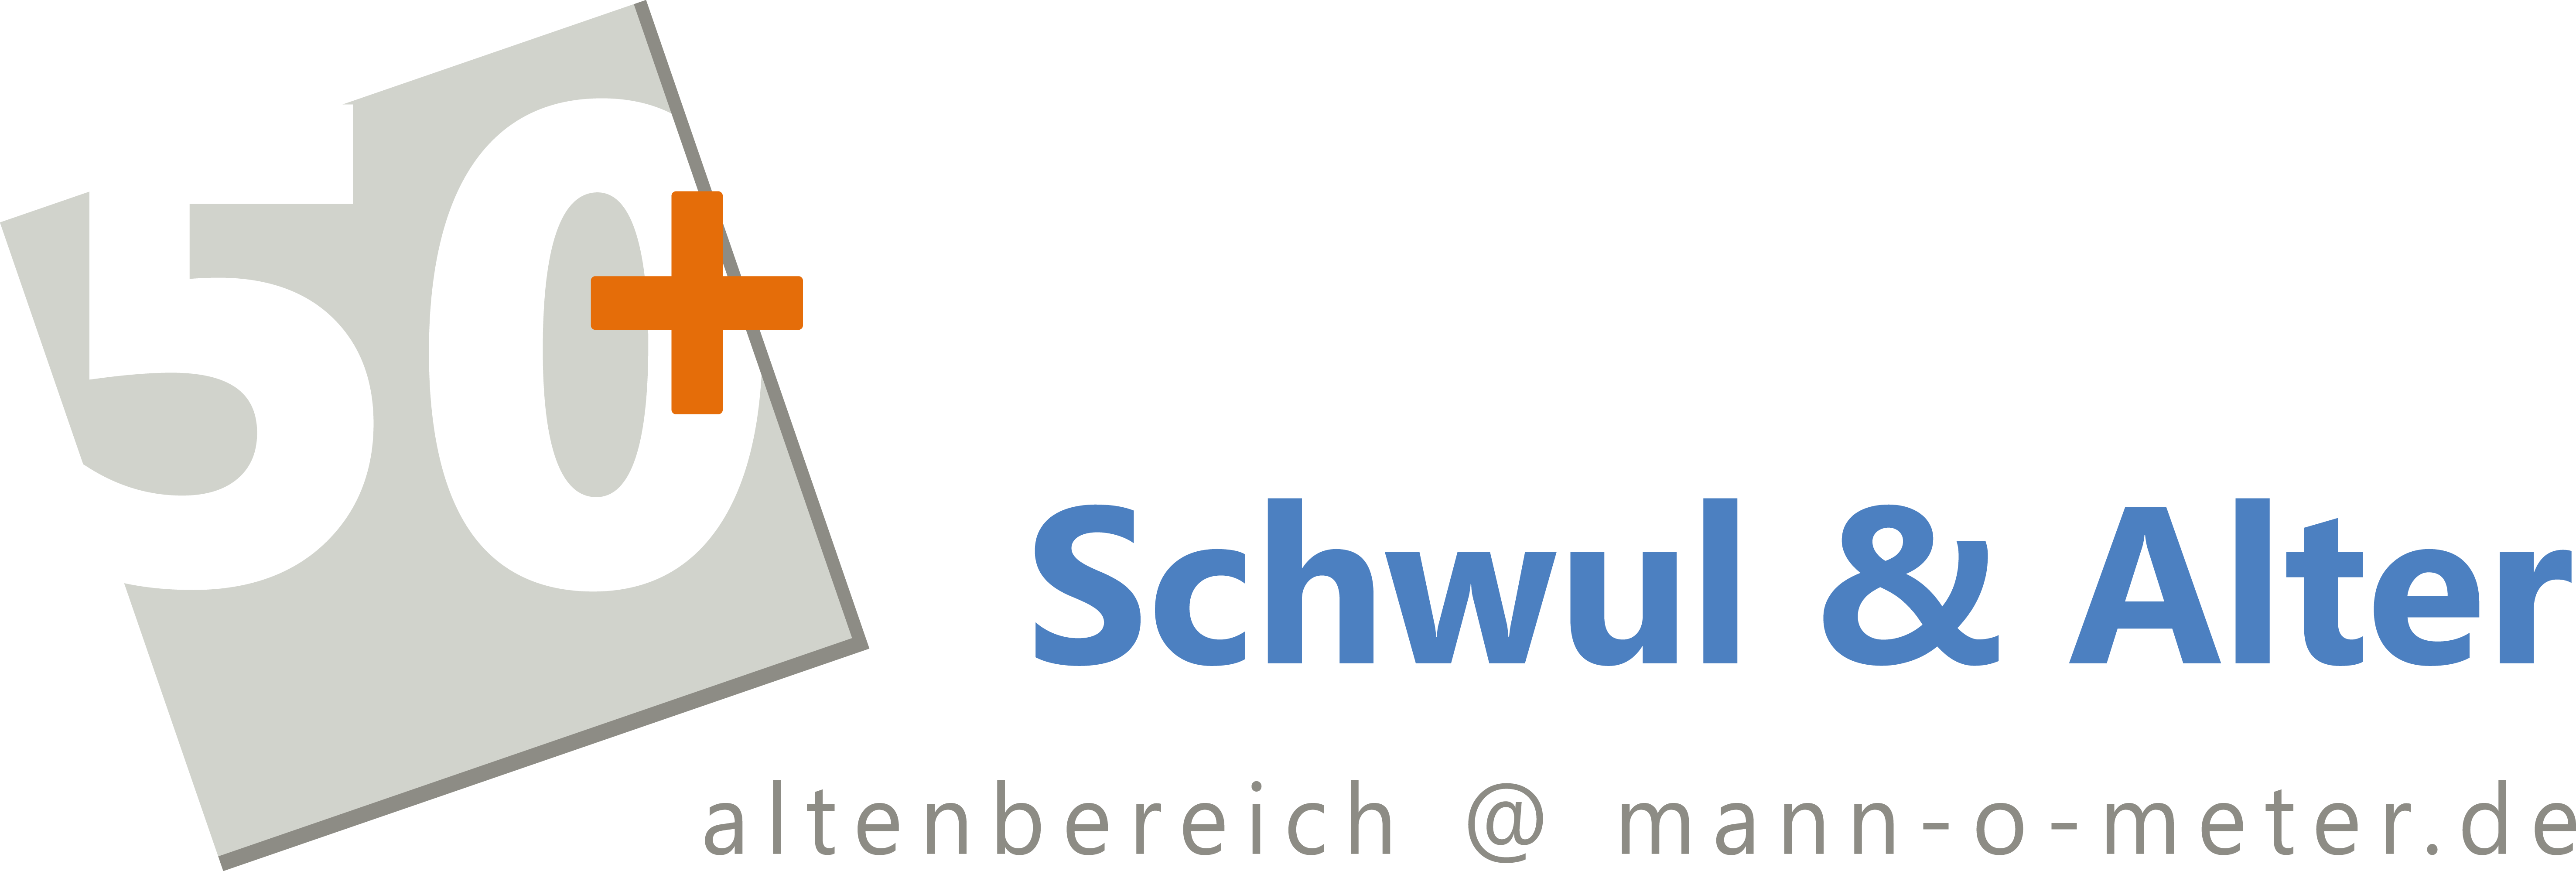 „Die Nachtschwärmer“ Evening discussion group and culture for gay and bisexual men aged 50+